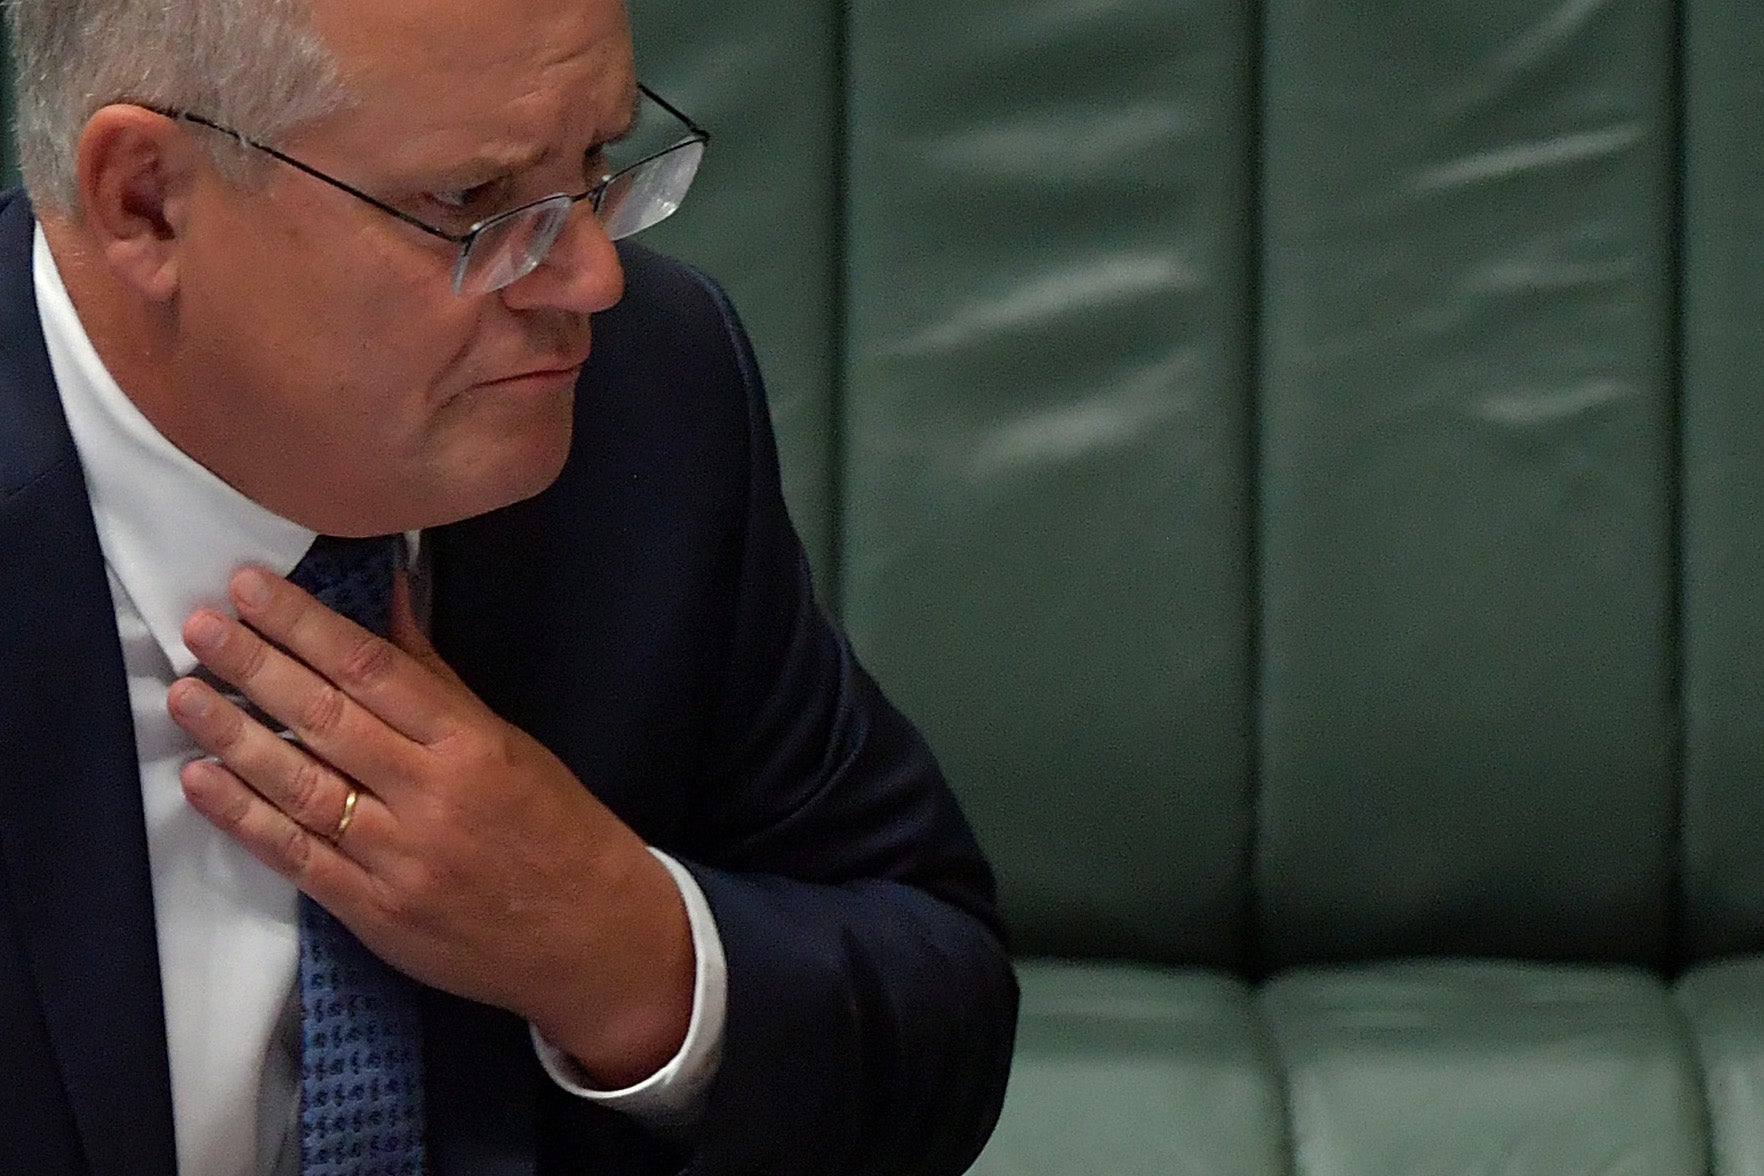 Former political staffer who alleged she was raped in the parliament house has slammed PM Morrison for ‘victim-blaming rhetoric’